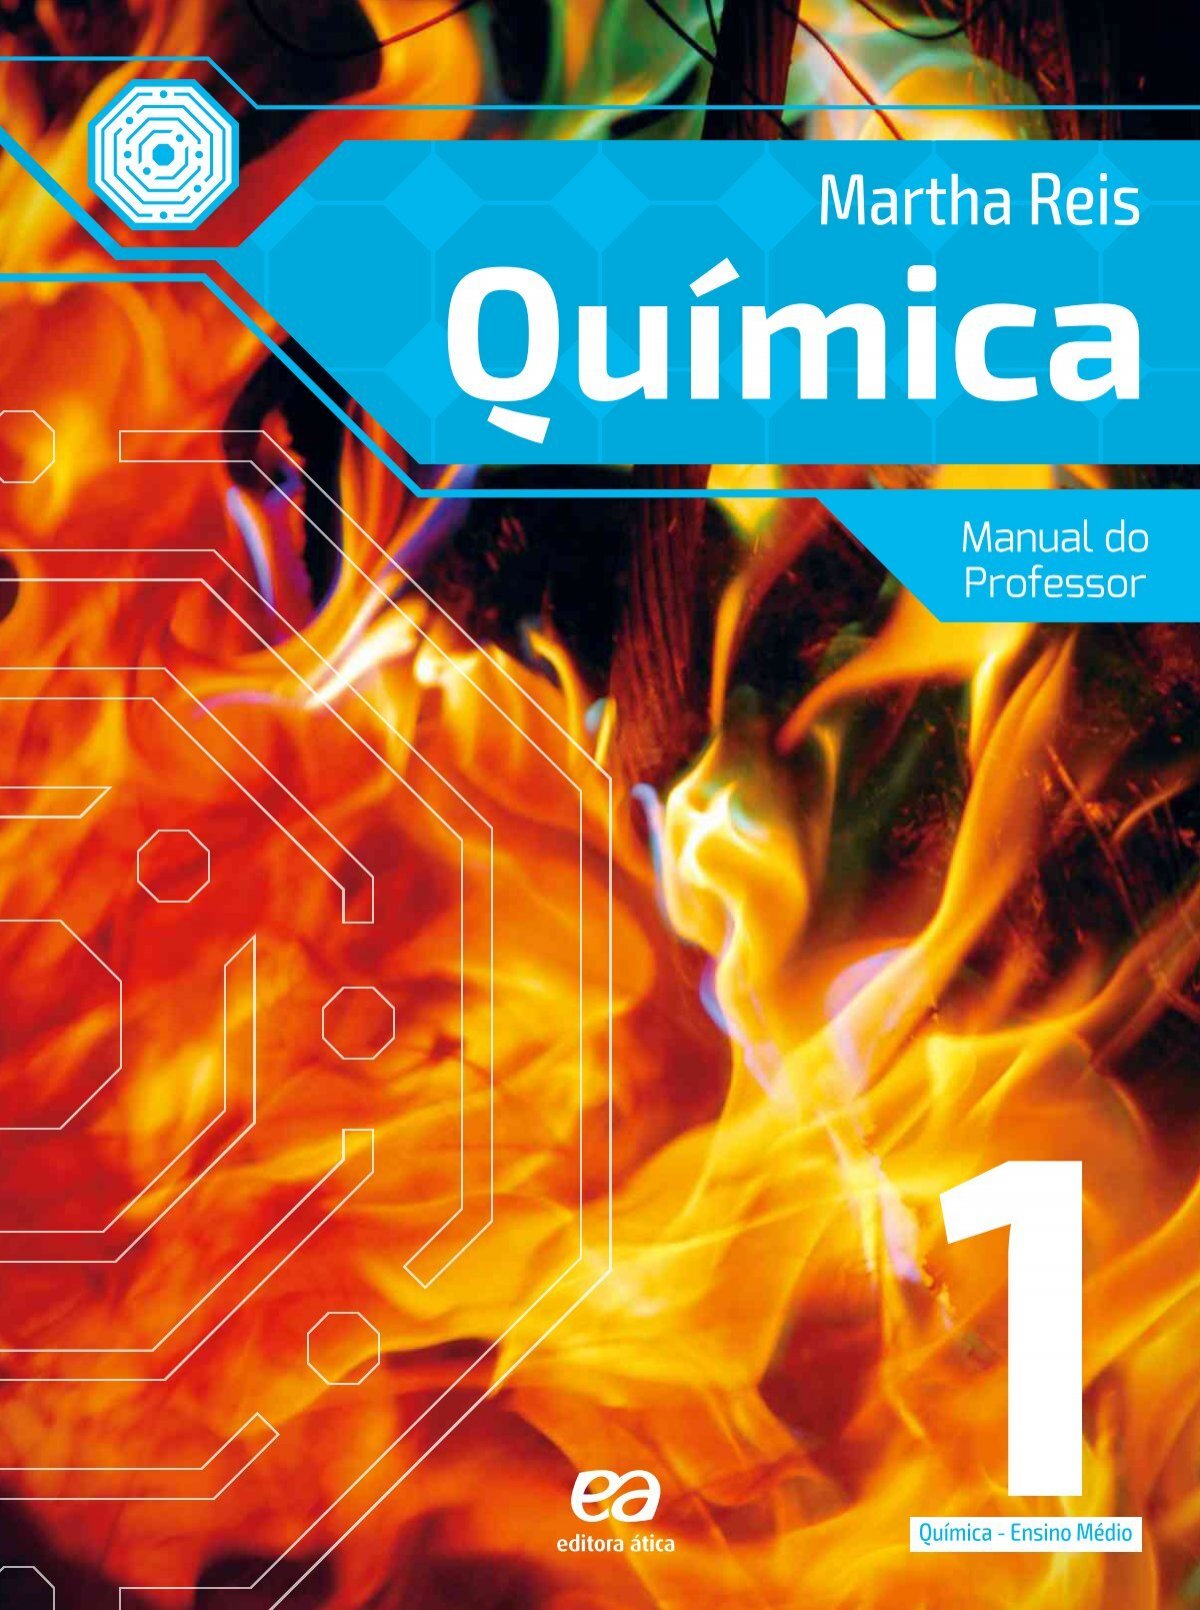 Quimica1 by Editora FTD - Issuu